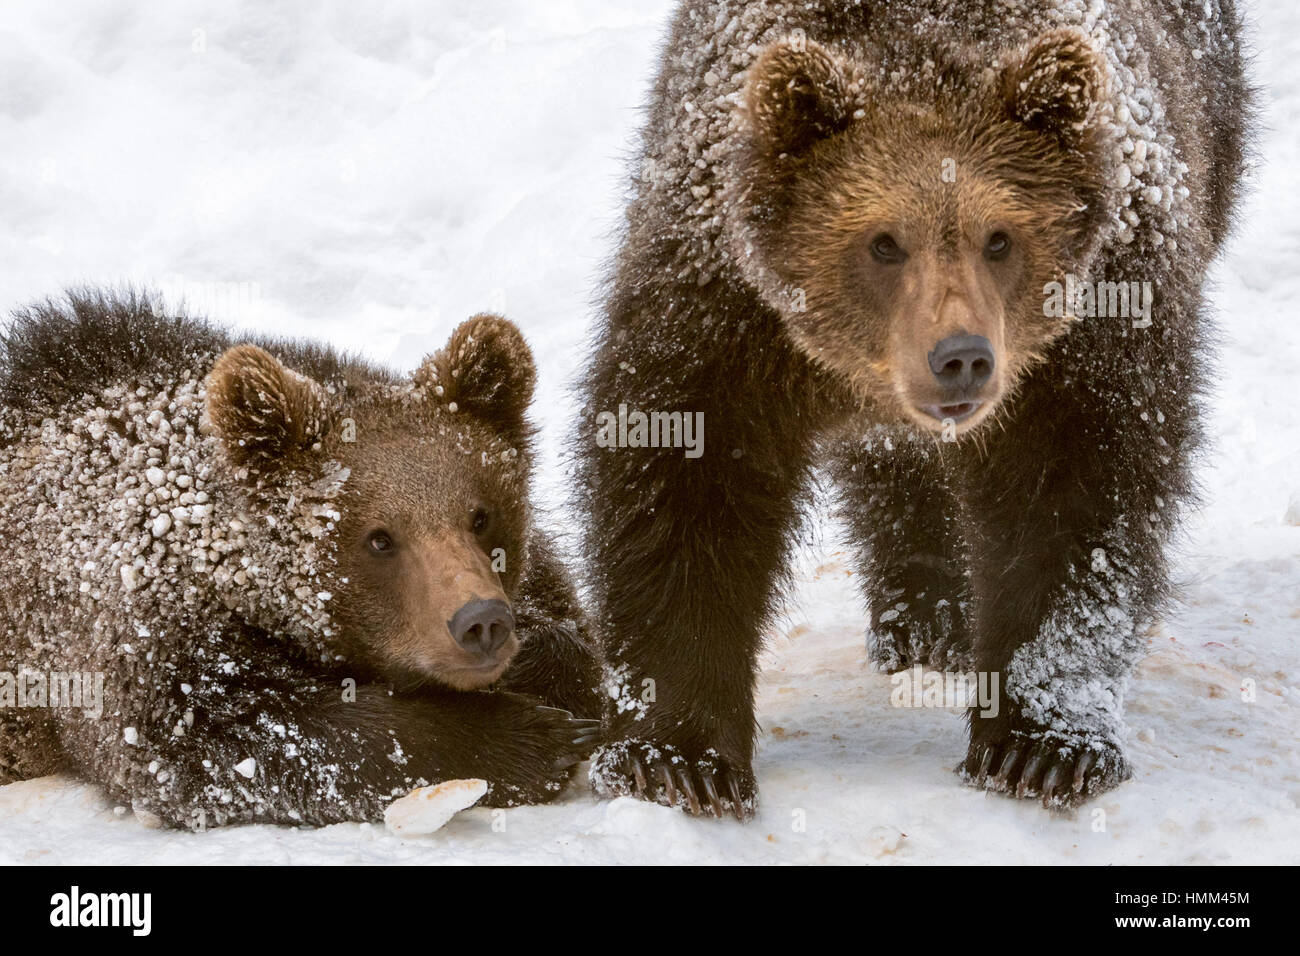 Close up portrait of two 1-year old  brown bear cubs (Ursus arctos arctos) in the snow in winter Stock Photo